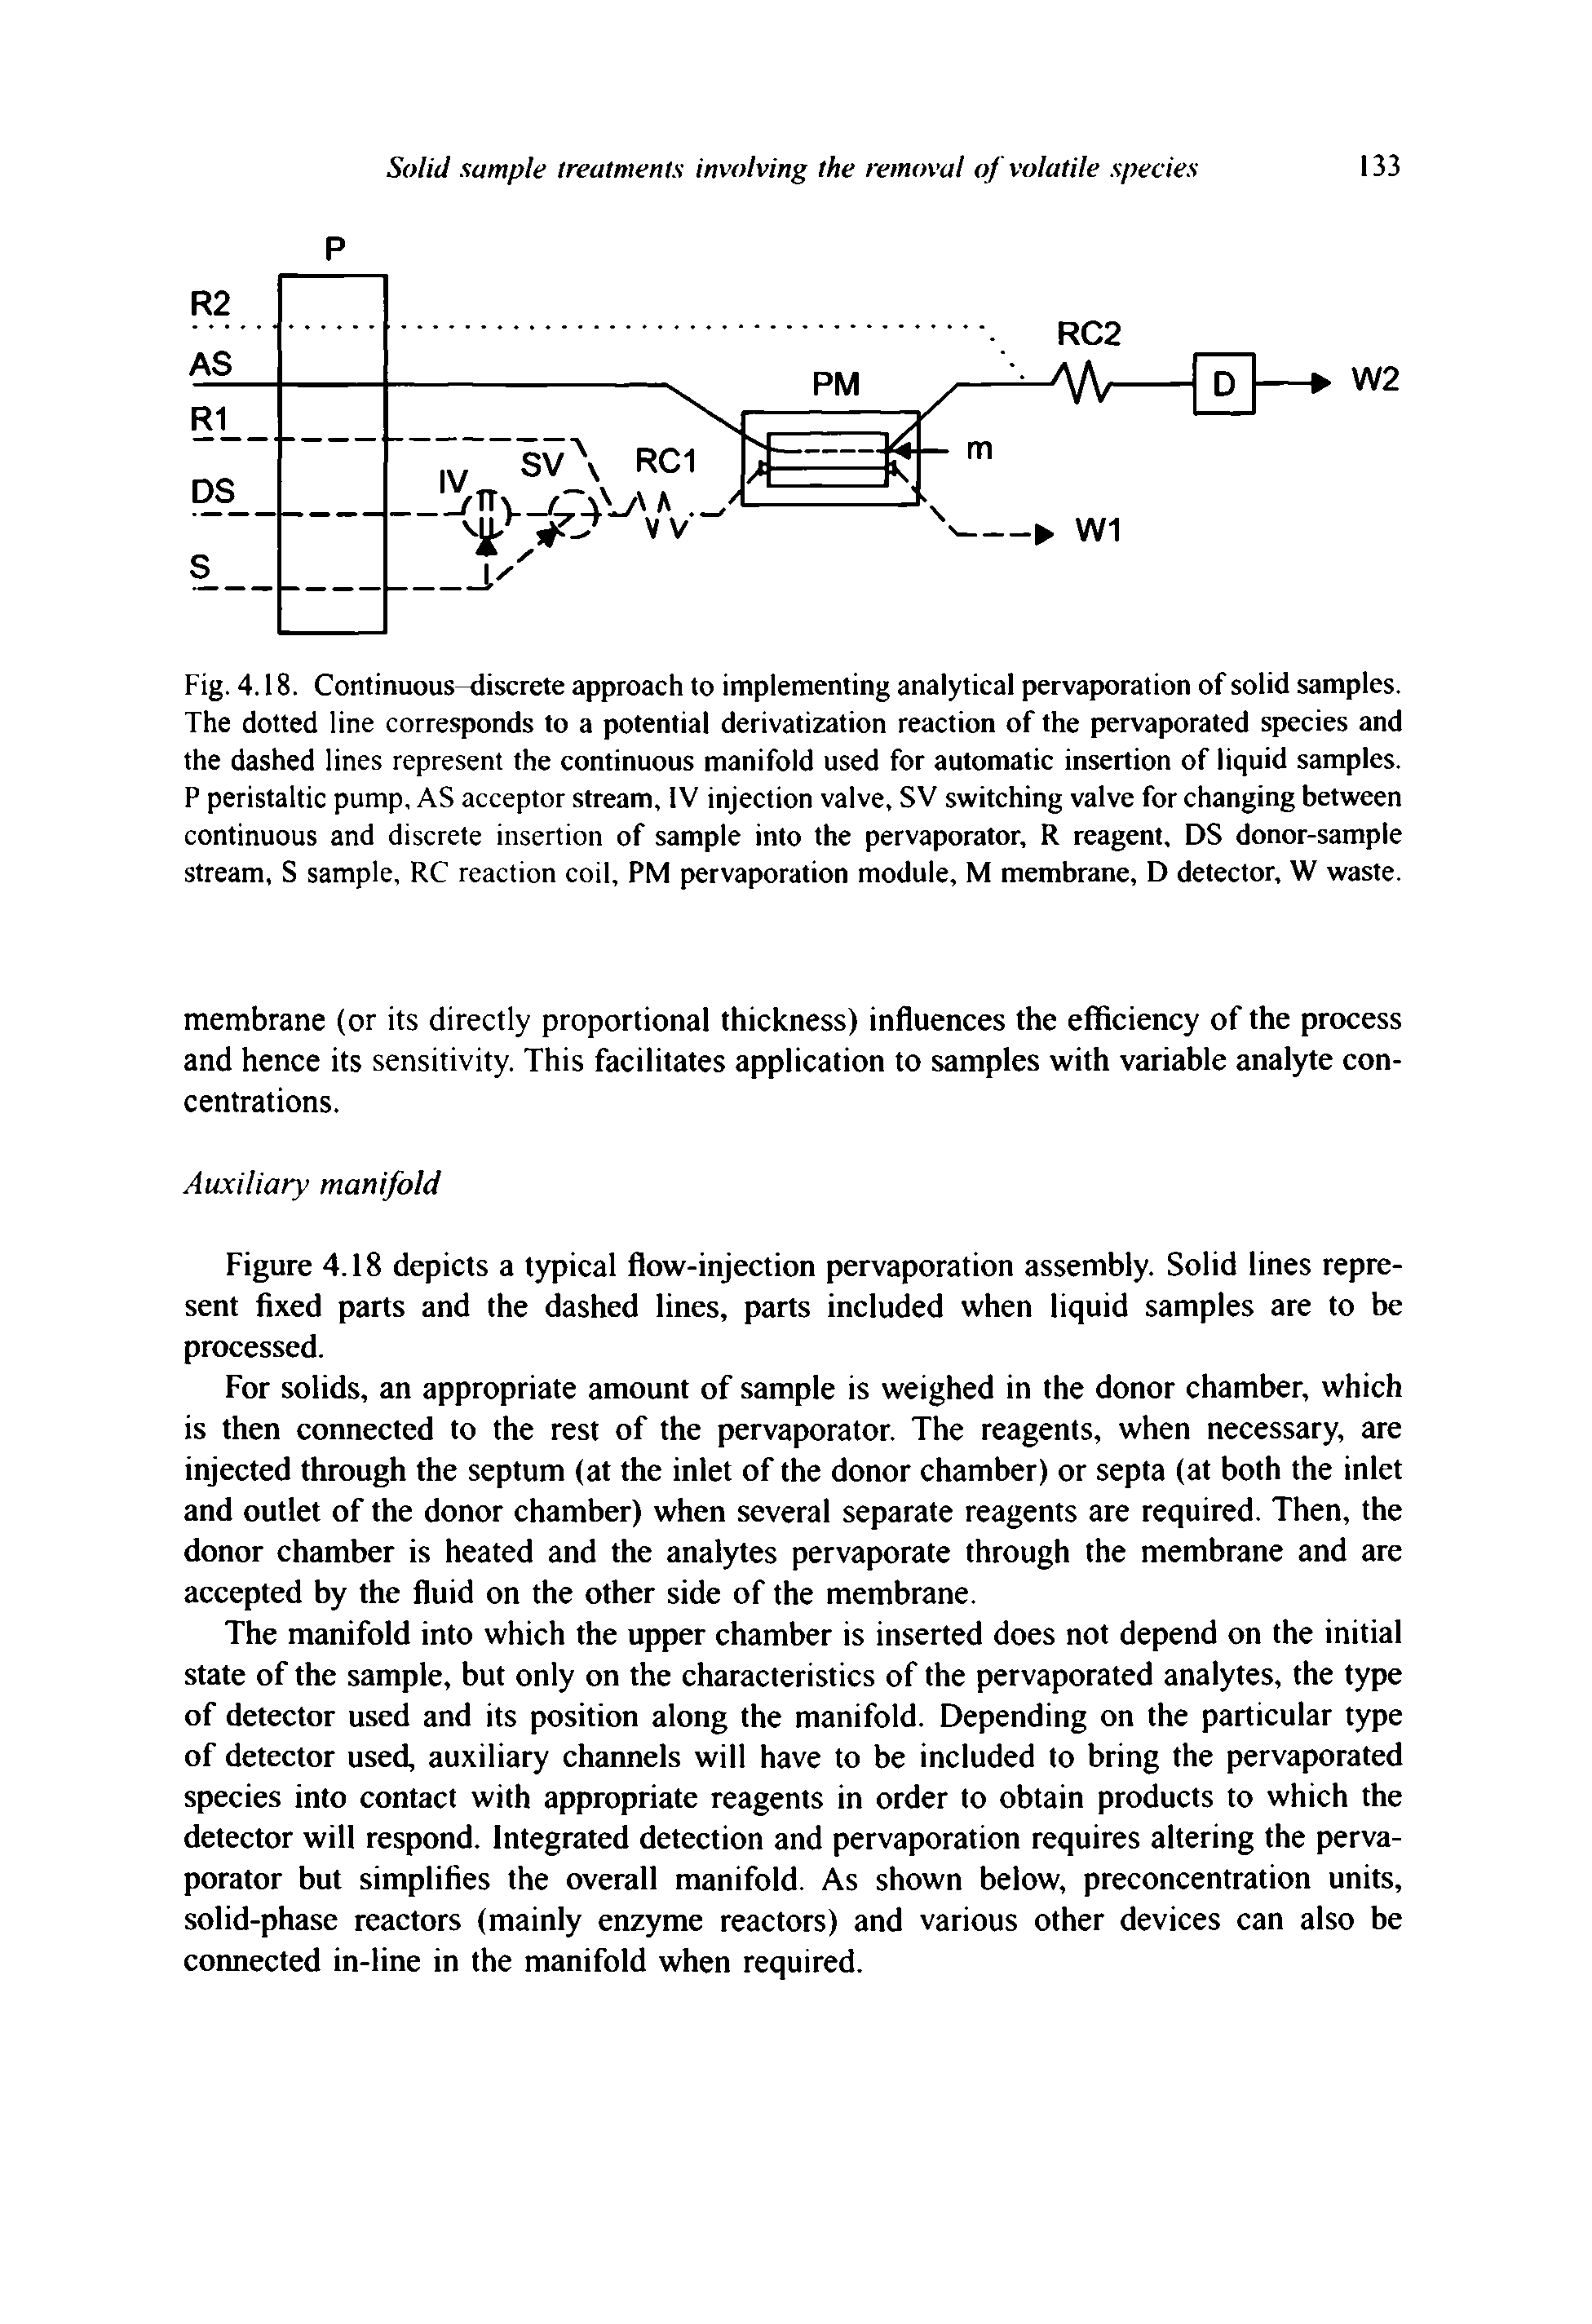 Fig. 4.18. Continuous iscrete approach to implementing analytical pervaporation of solid samples. The dotted line corresponds to a potential derivatization reaction of the pervaporated species and the dashed lines represent the continuous manifold used for automatic insertion of liquid samples. P peristaltic pump, AS acceptor stream, IV injection valve, SV switching valve for changing between continuous and discrete insertion of sample into the pervaporator, R reagent, DS donor-sample stream, S sample, RC reaction coil, PM pervaporation module, M membrane, D detector, W waste.